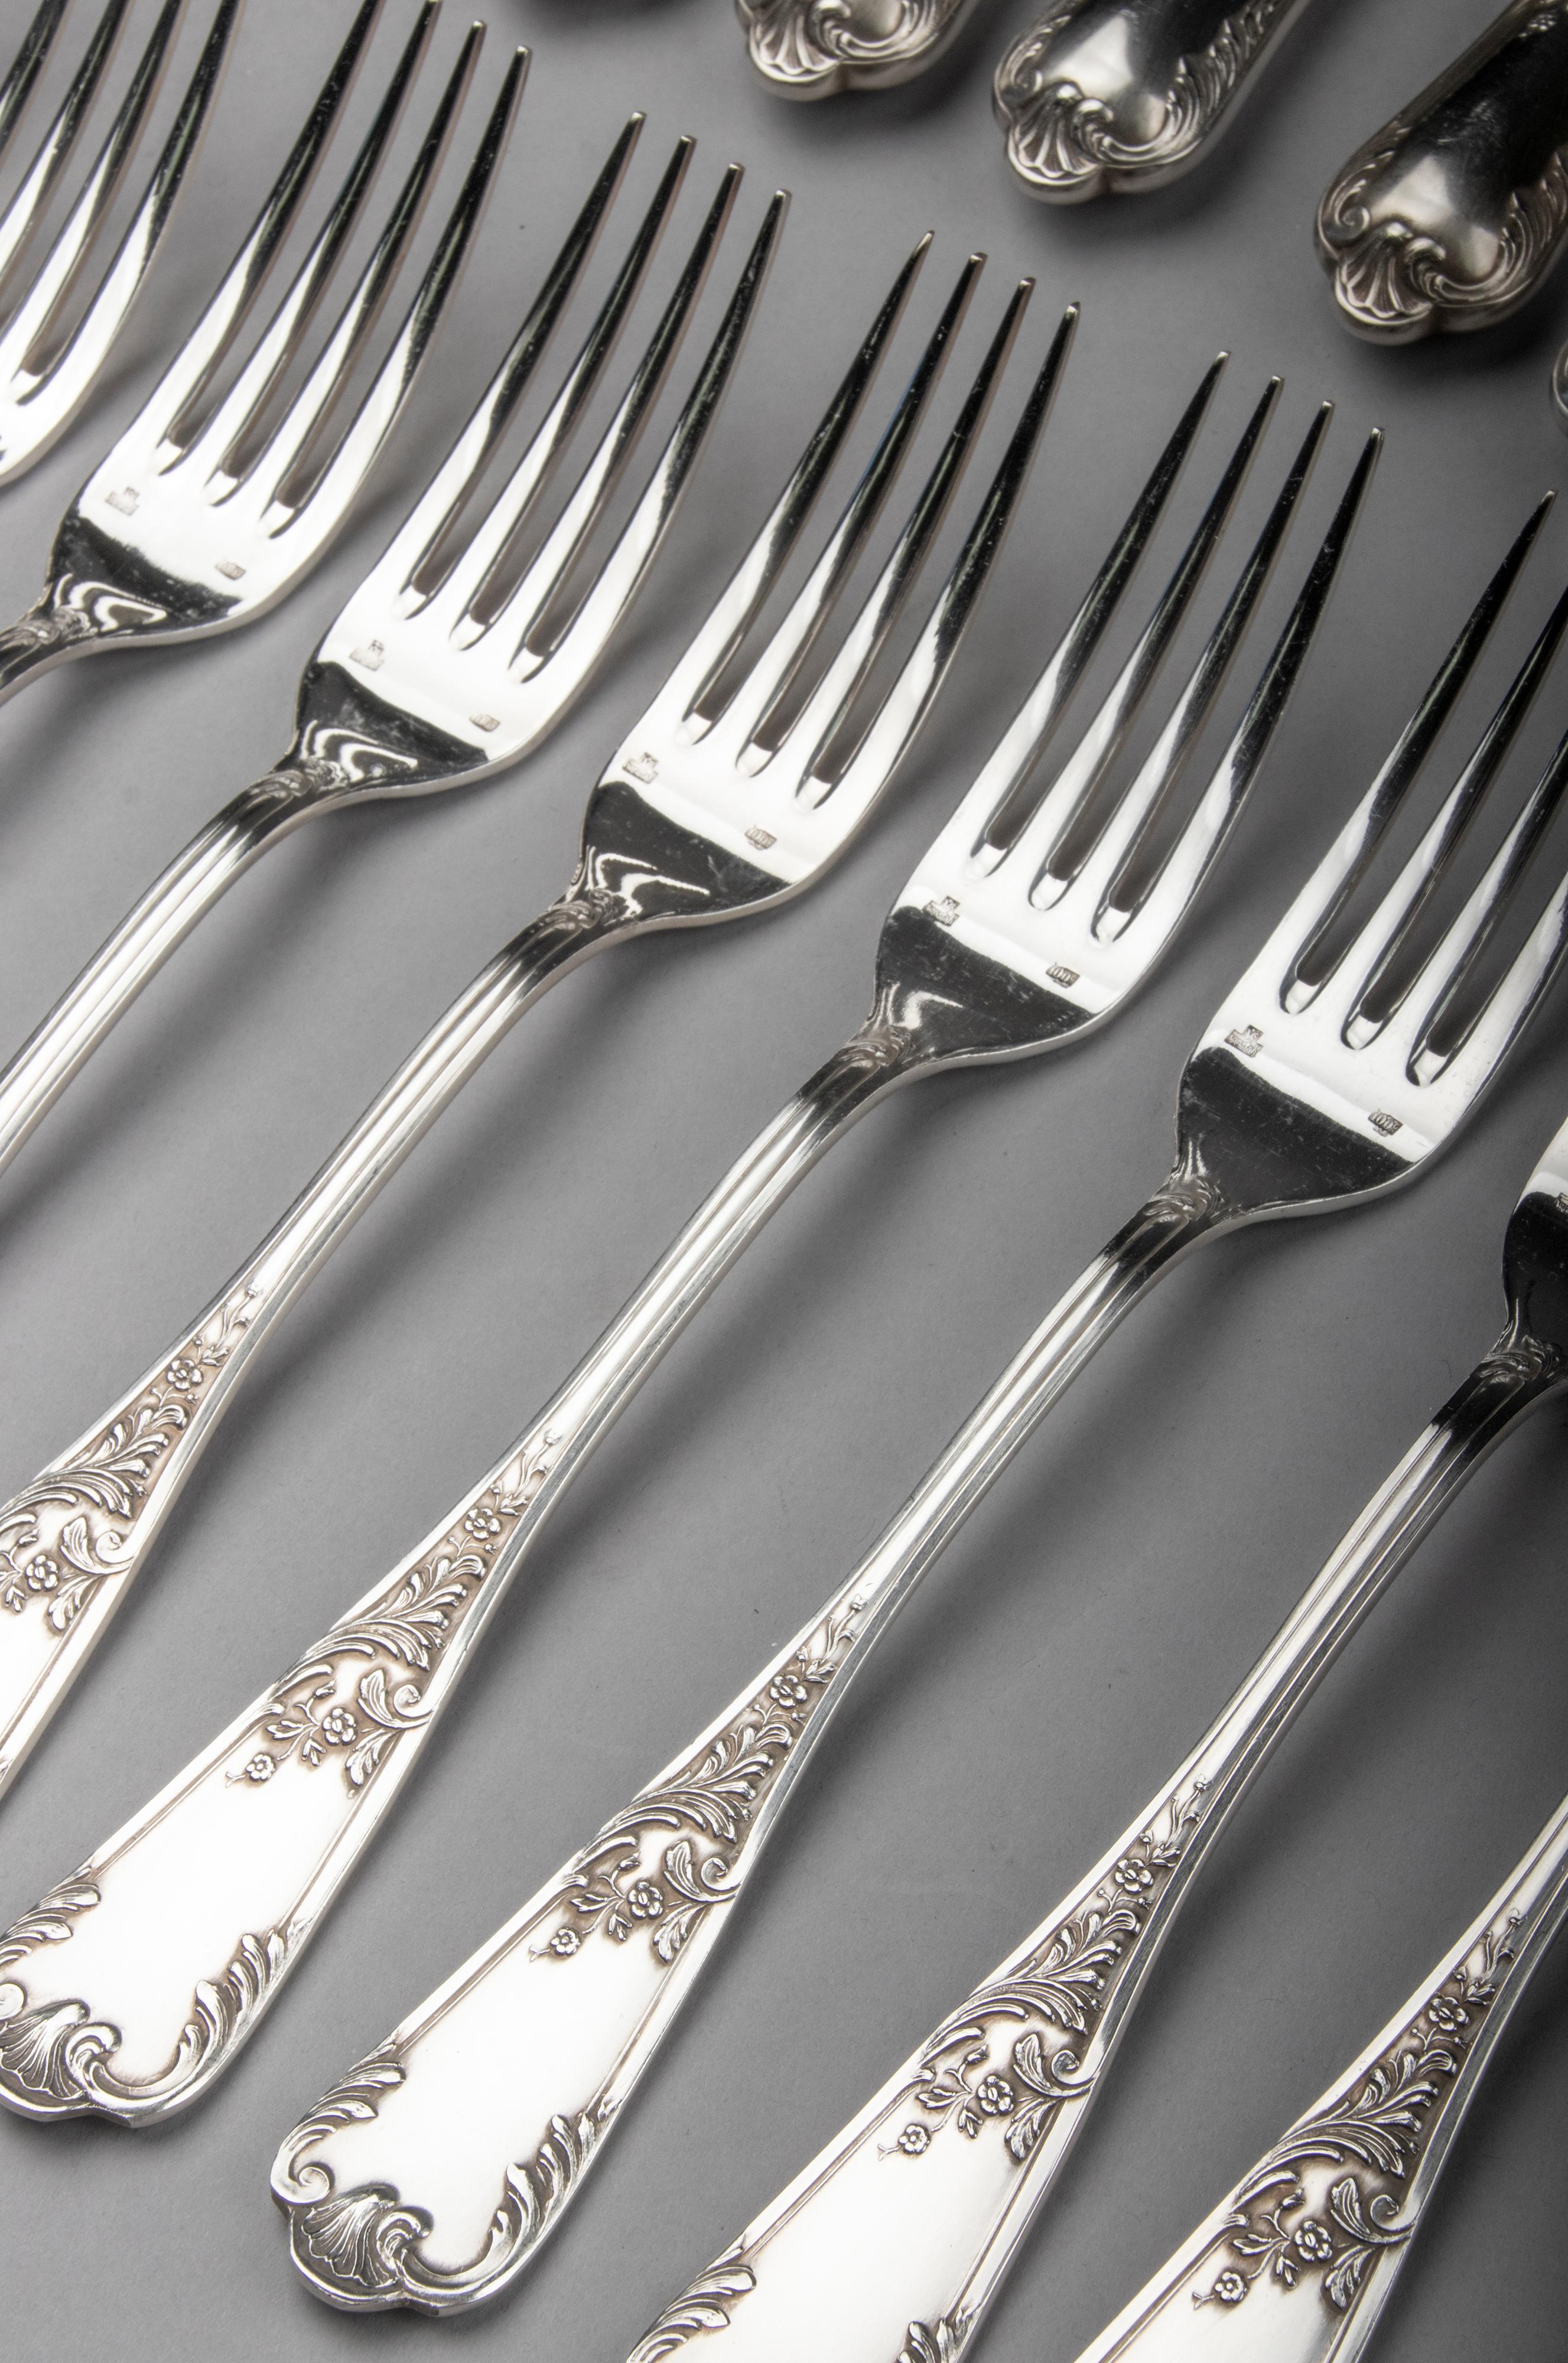 102-Piece Silver-Plated Flatware Set Made by Vanstahl Louis XV-Style 8